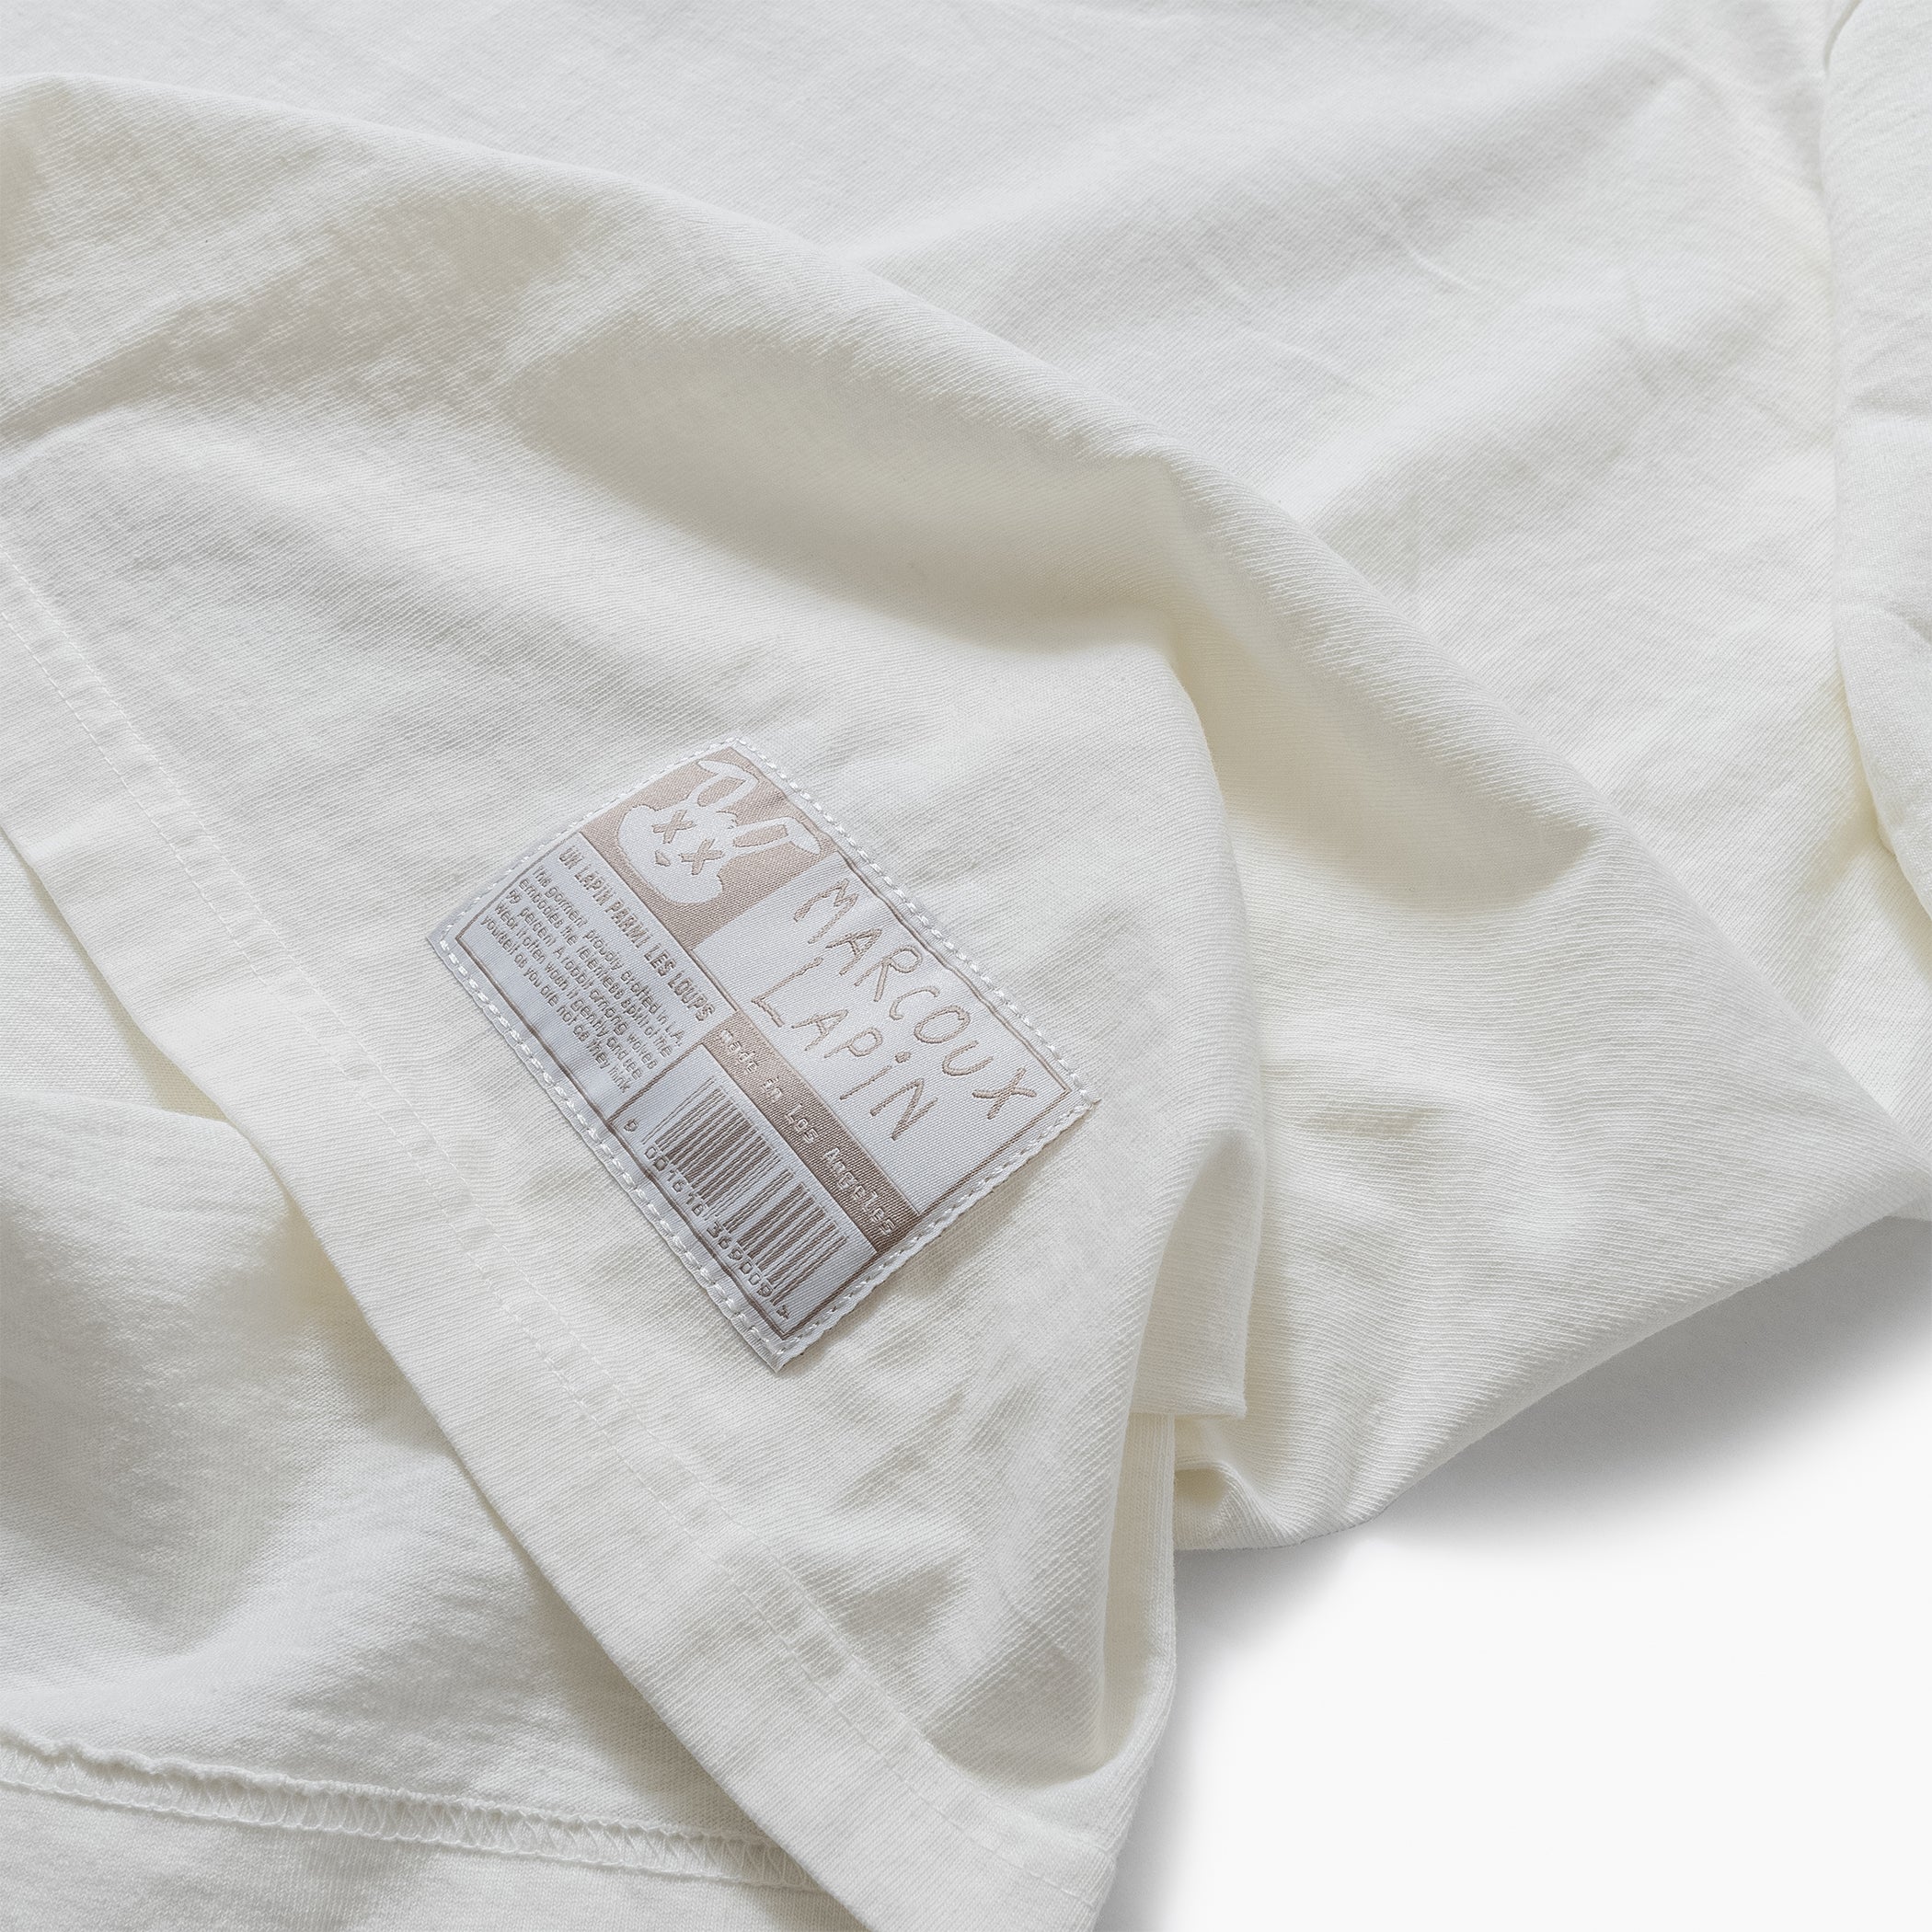 The Socialite Society Members Tee (Off-White)